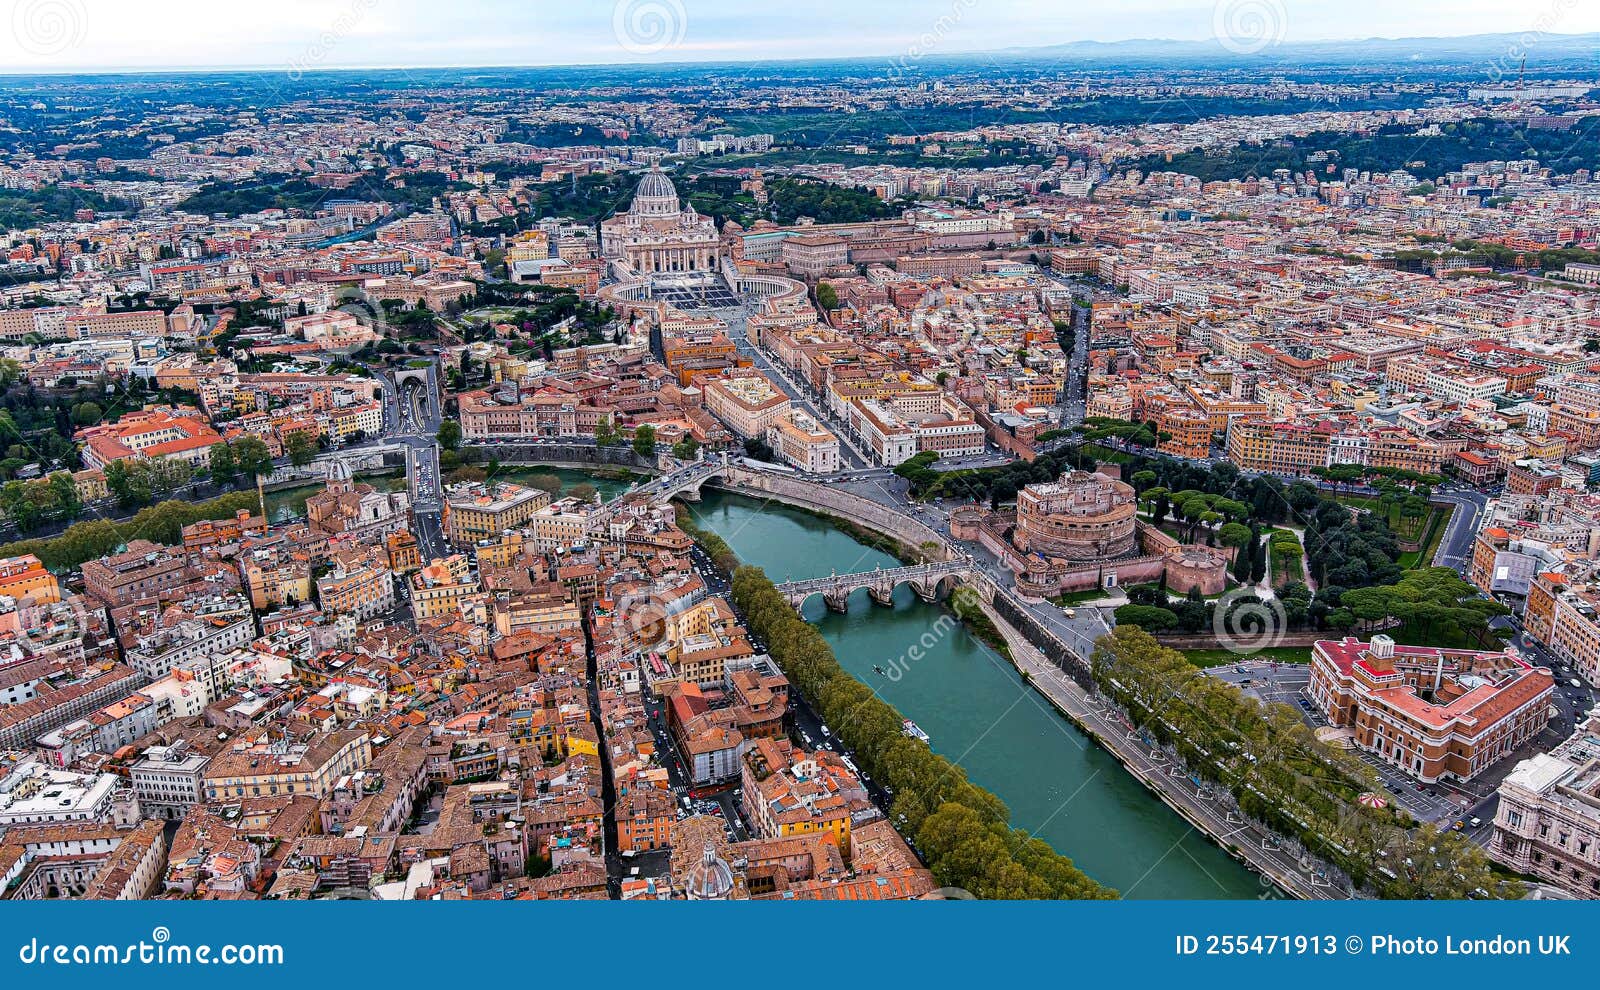 st. peter`s basilica in vatican city and rome aerial skyline in italy